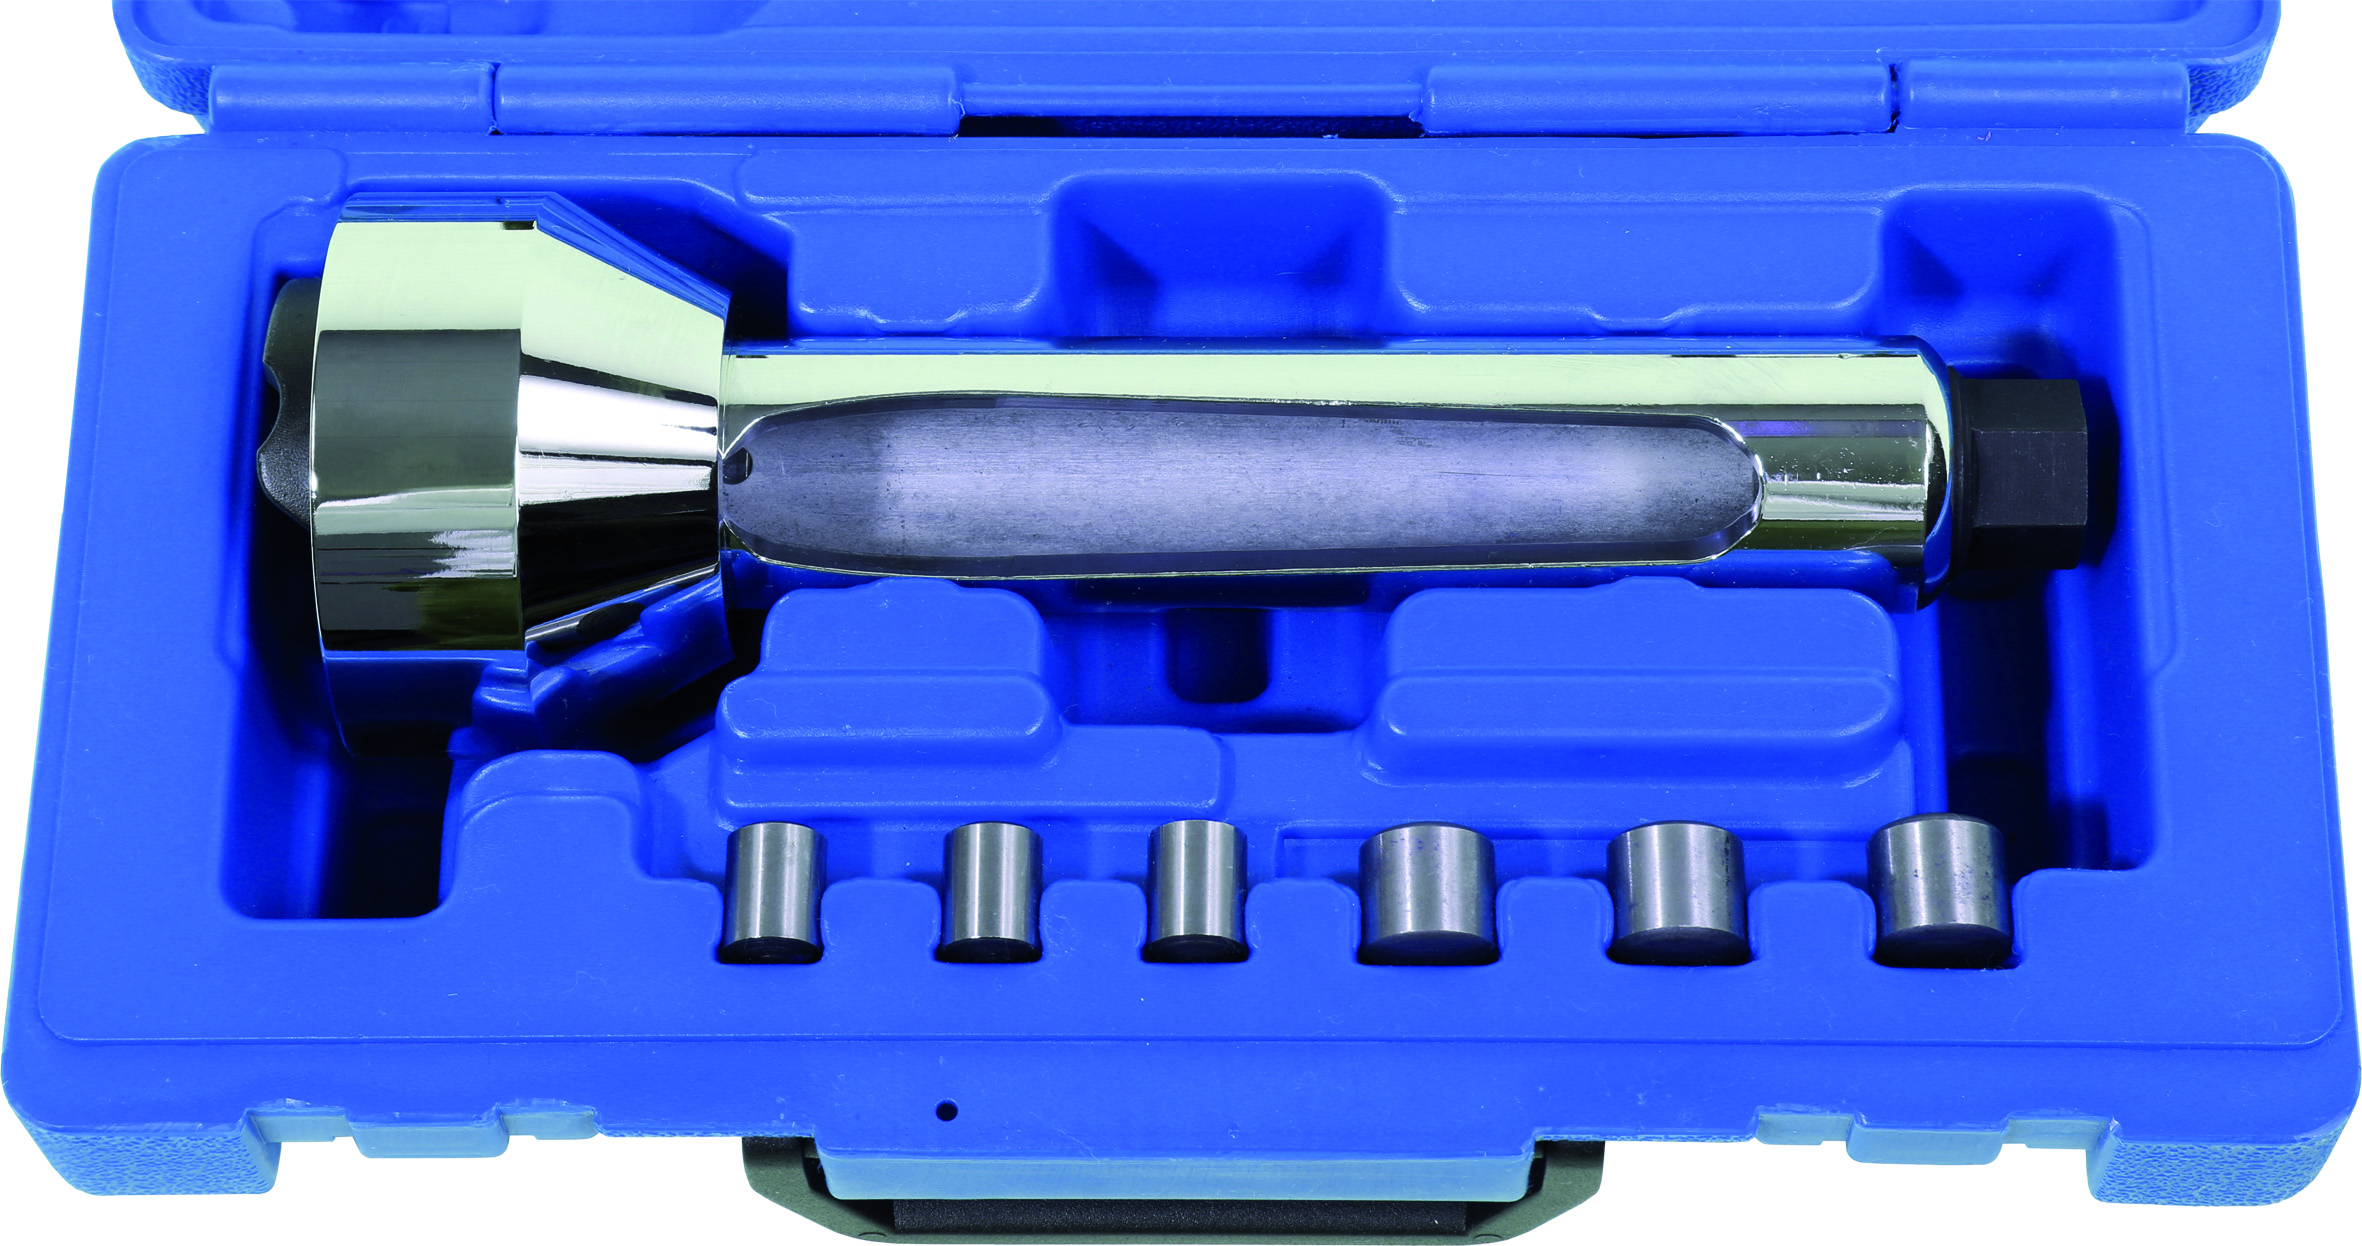 Track rod joint release tool, 7 parts of diameter 28-45 mm